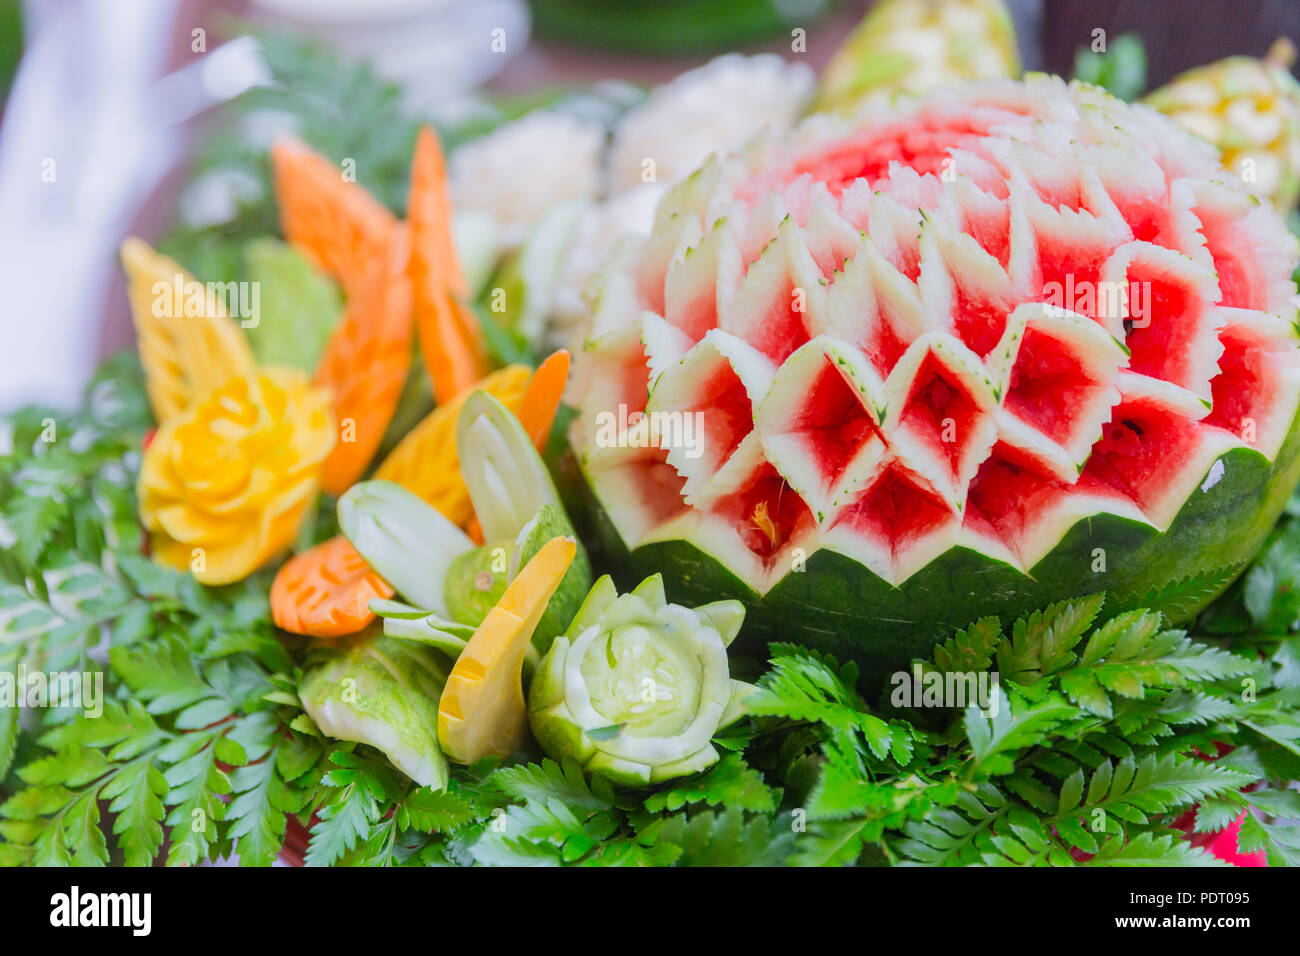 Thai food traditional art craft engrave on fruit and vegetable in cuisine decoration Stock Photo